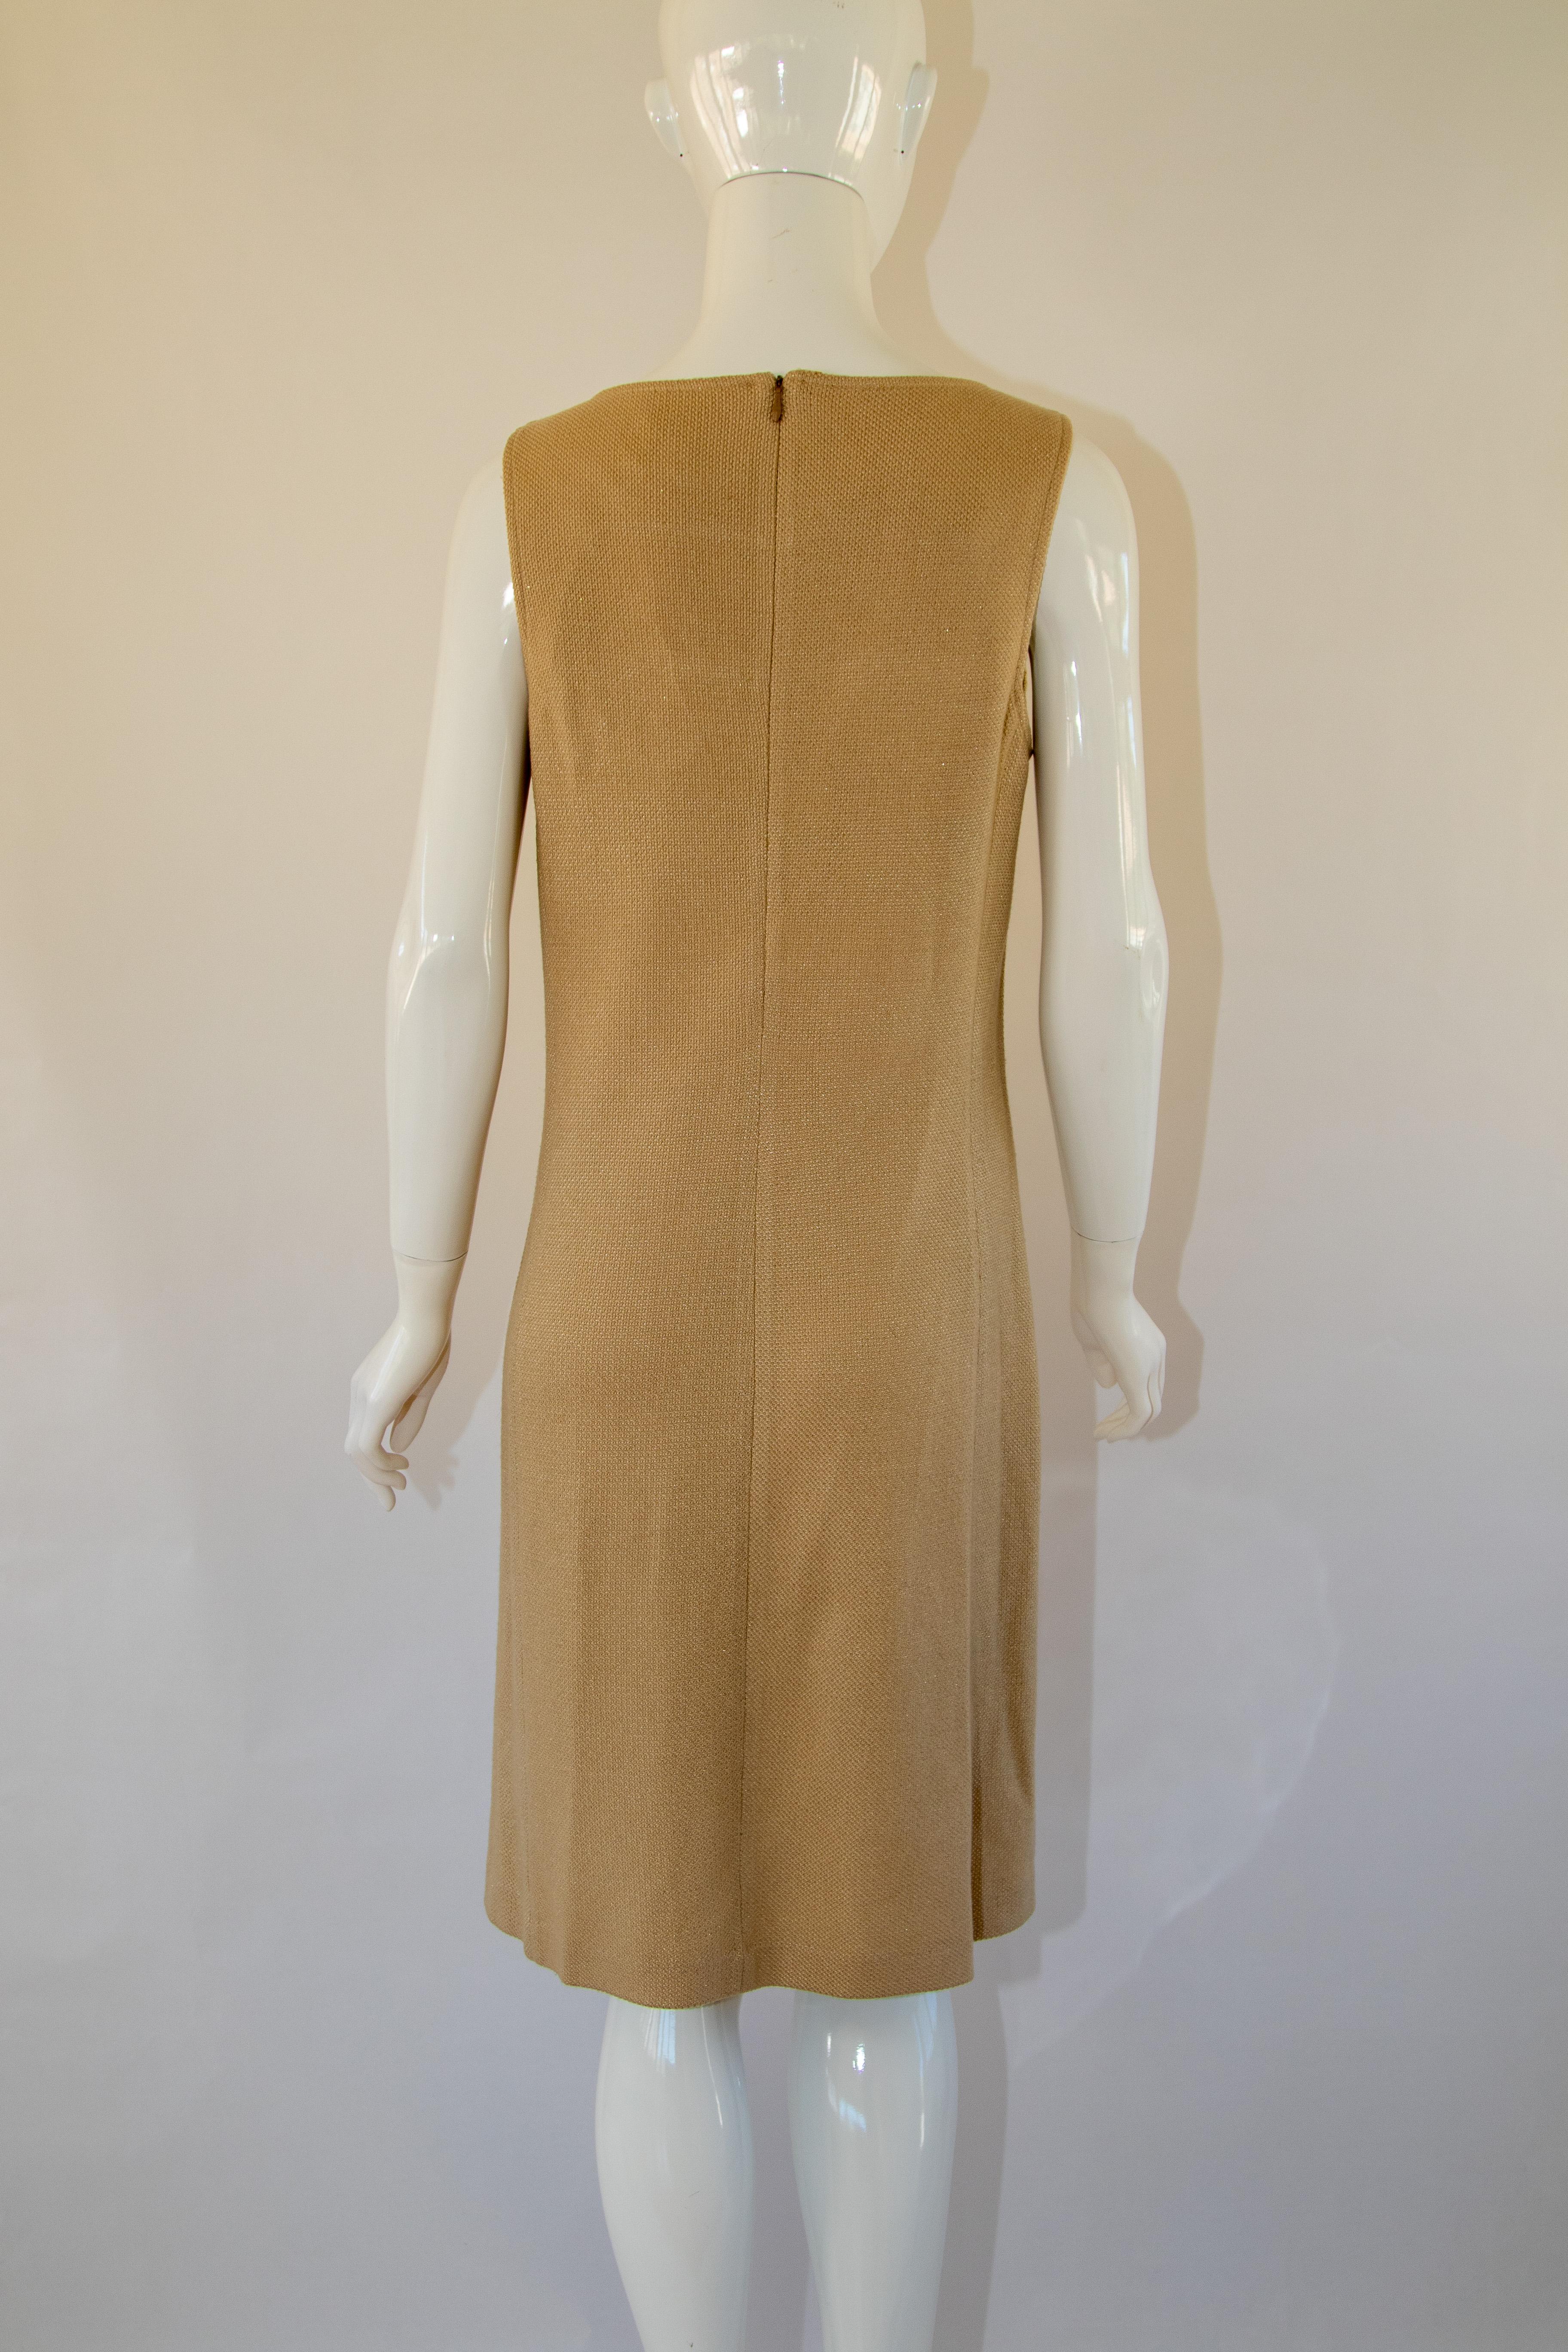 Vintage St John Collection By Marie Gray Beige Knit Wool Mini Dress For Sale 6